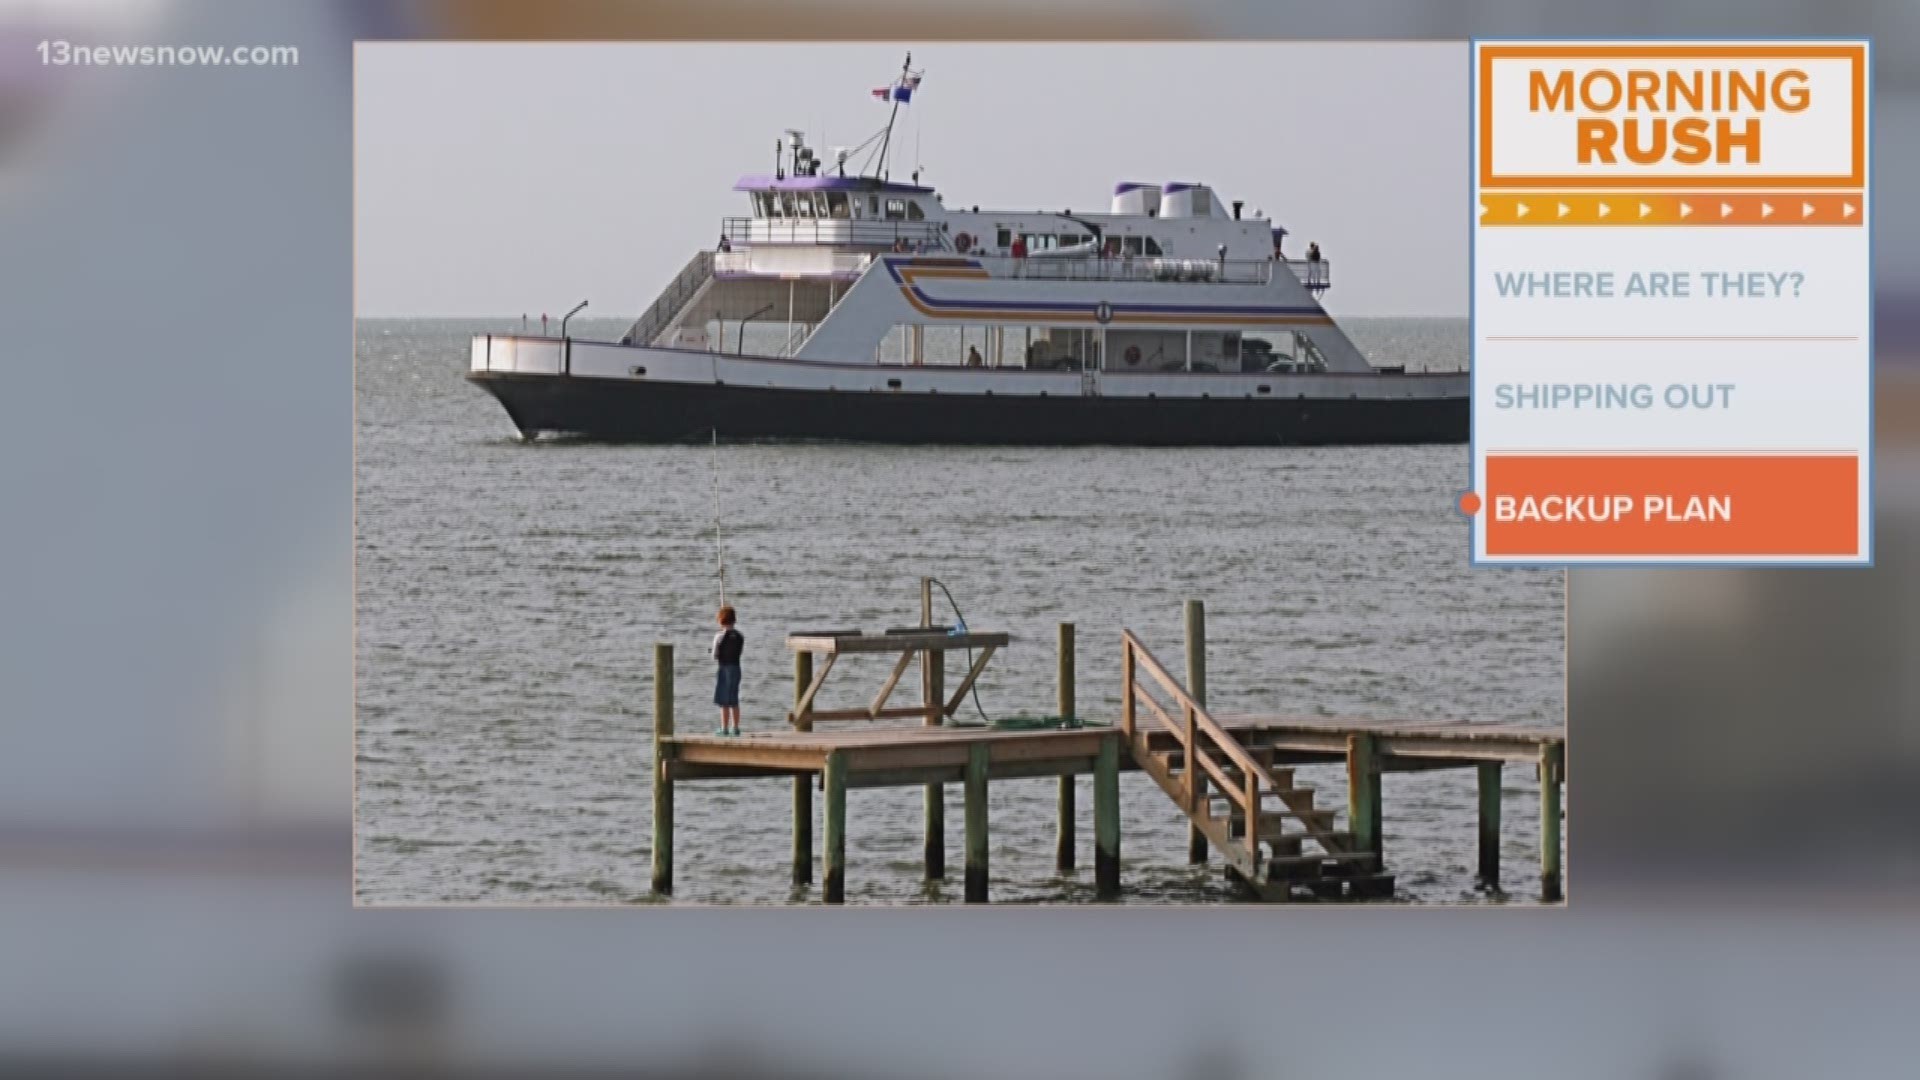 Long-awaited passenger-only ferry service between two popular North Carolina Outer Banks destinations is finally sailing.